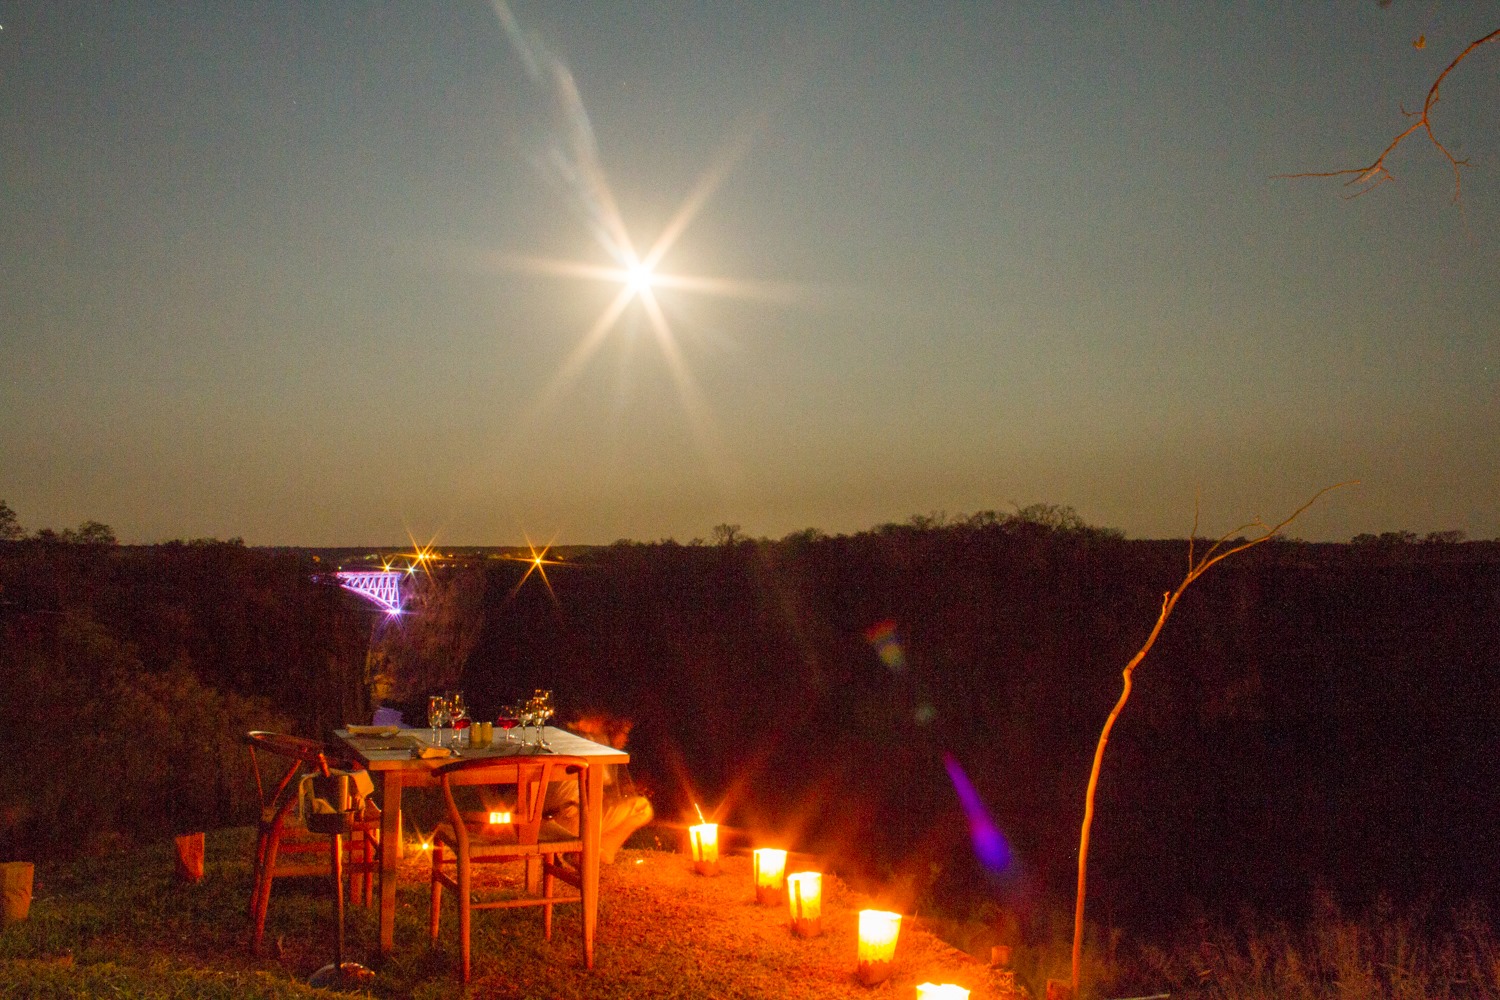 Dinner at the Lookout Cafe under the full moon - Victoria Falls, Zimbabwe